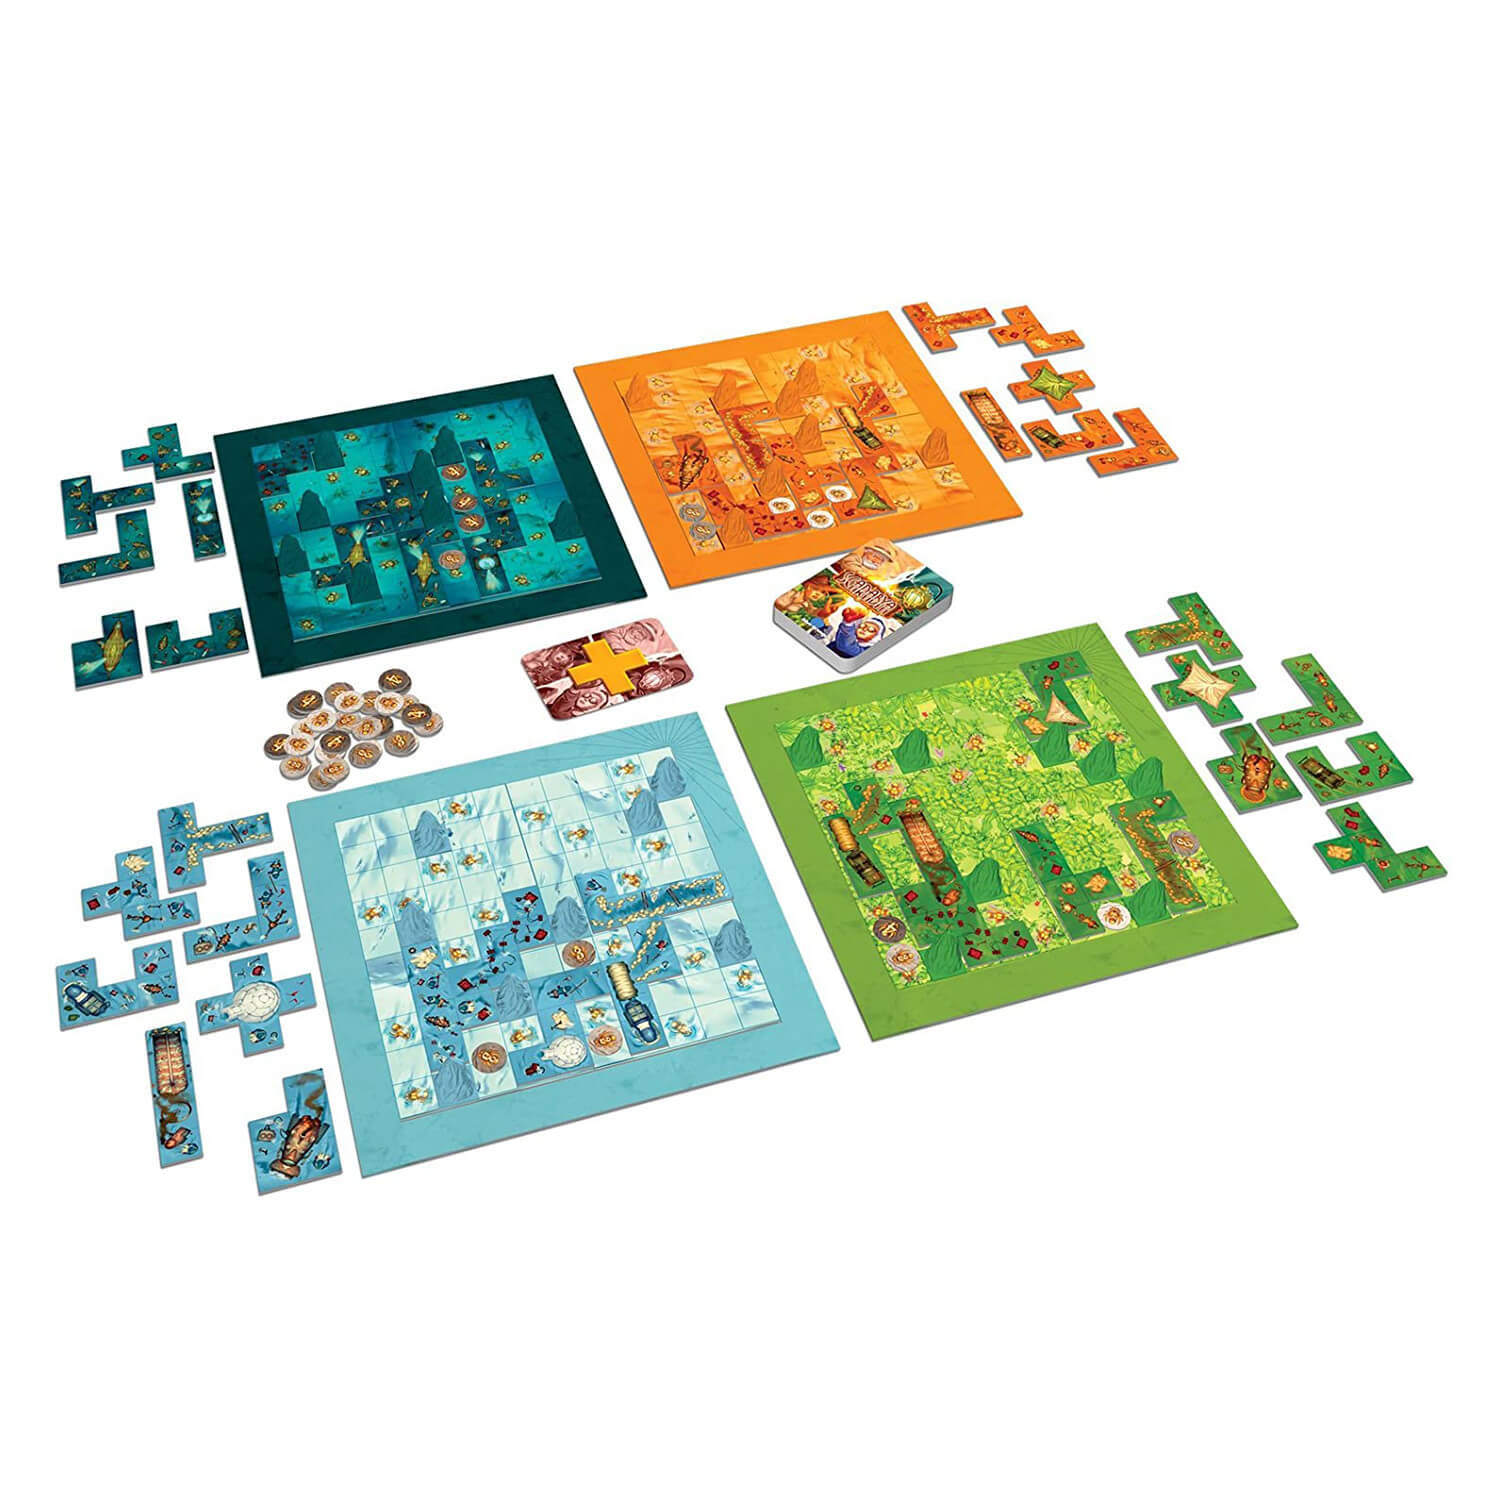 Gameboard and pieces set up for the Blue Orange Scarabya Game.